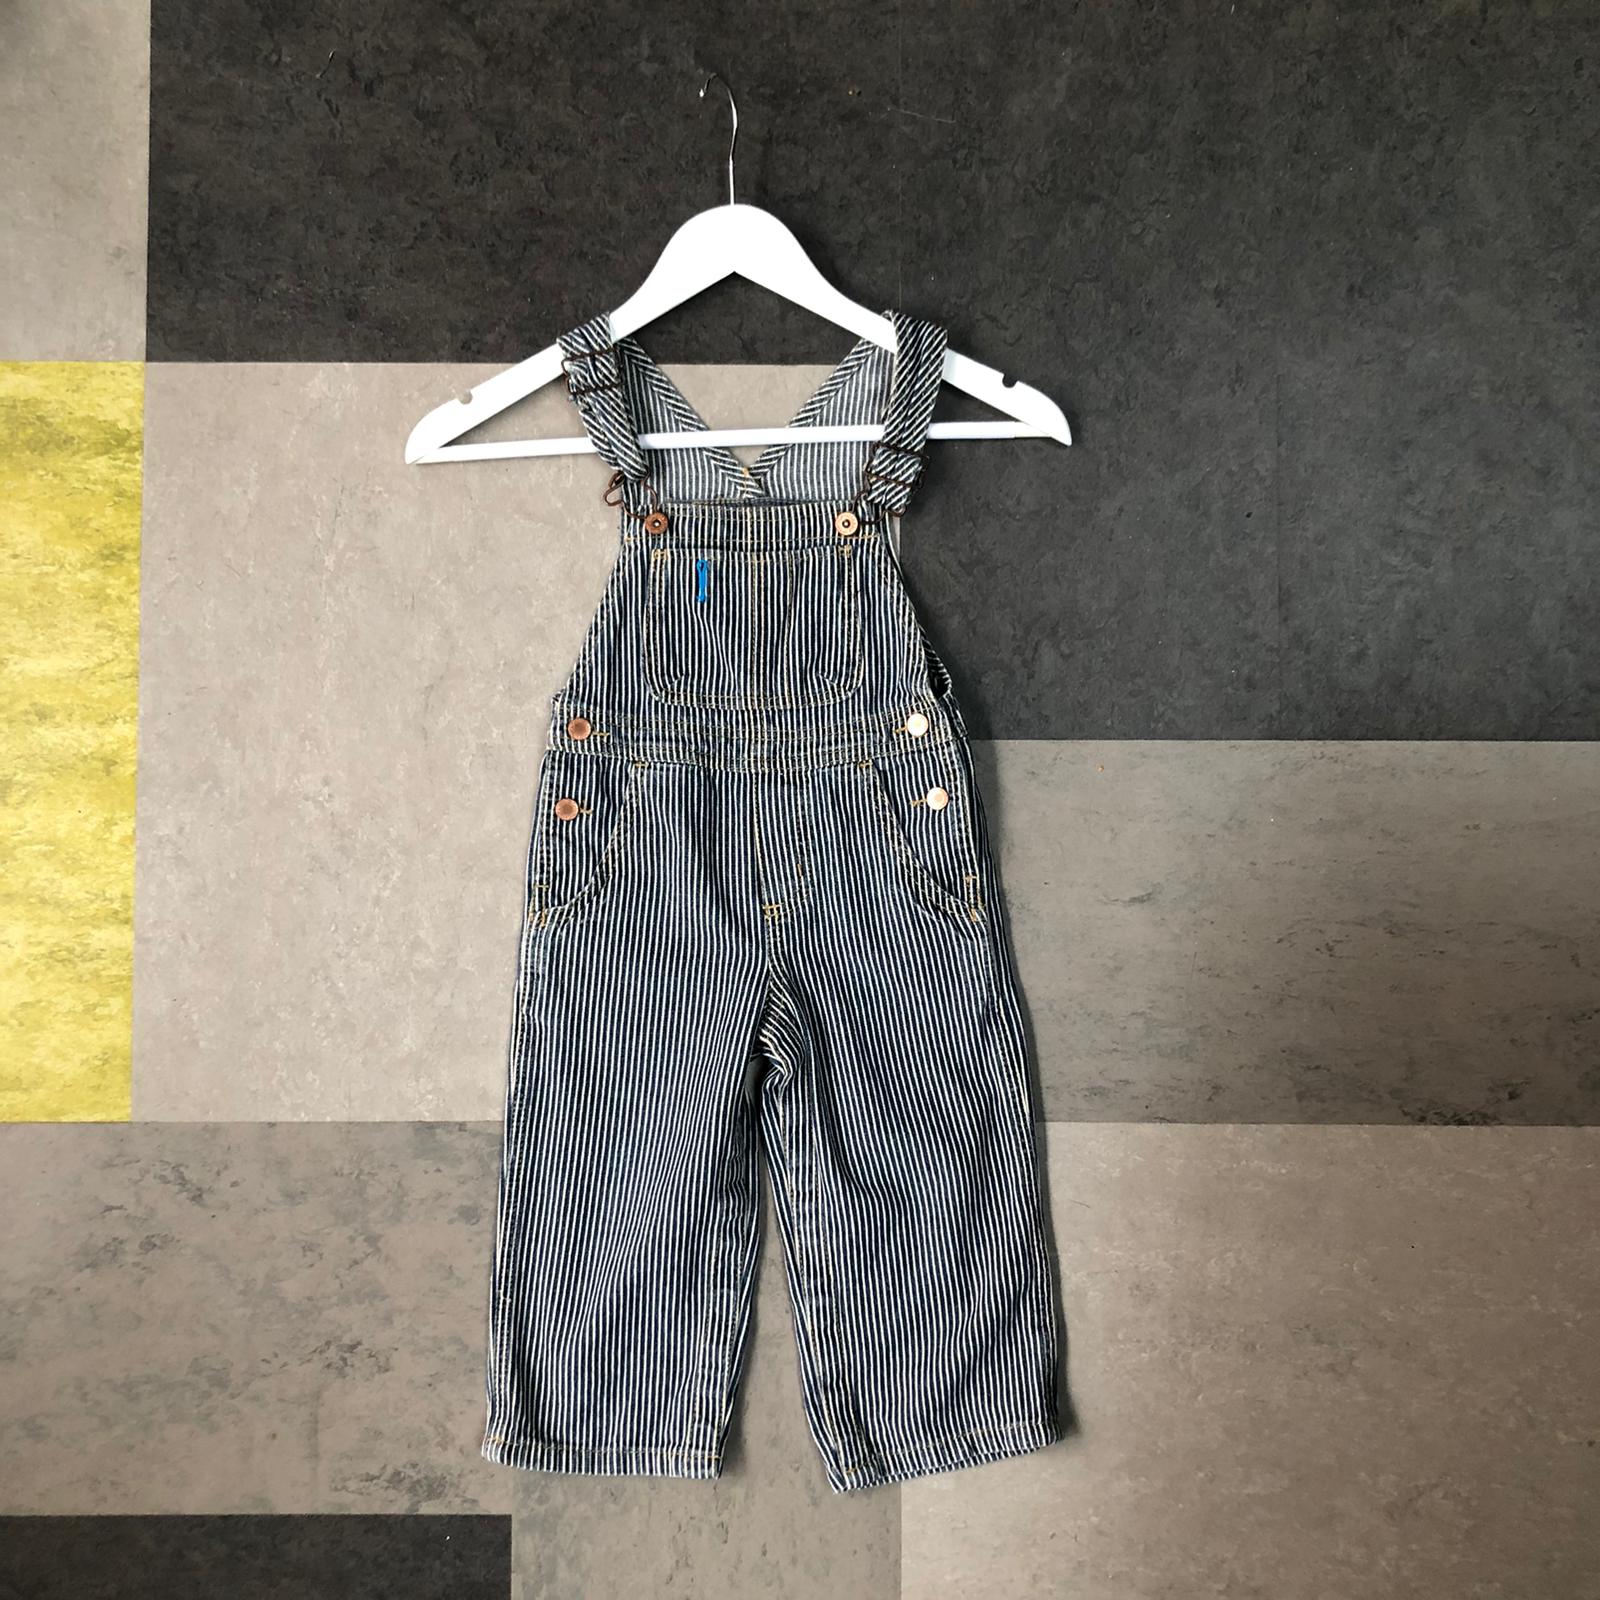 Vintage kids hickory dungarees- age 1-2